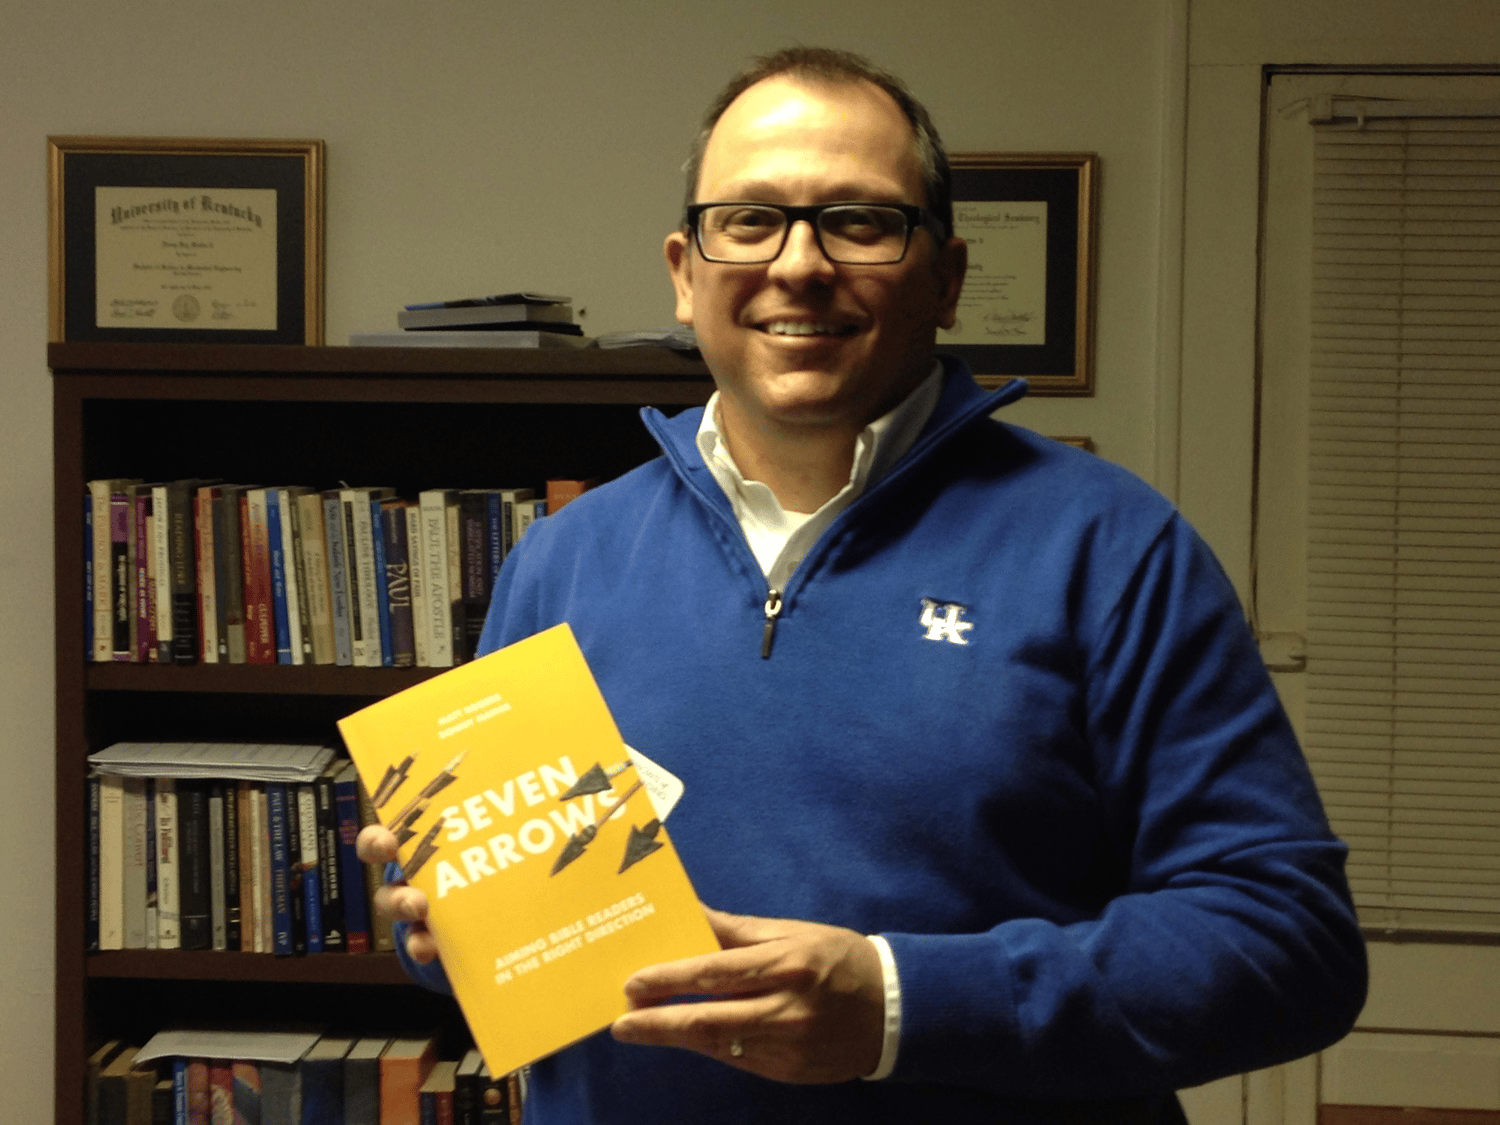 Donny Mathis, a professor of Christian Studies at NGU, proudly displays his new book "Seven Arrows: Aiming Bible Readers in the Right Direction", a comprehensive guide to studying the Scriptures.